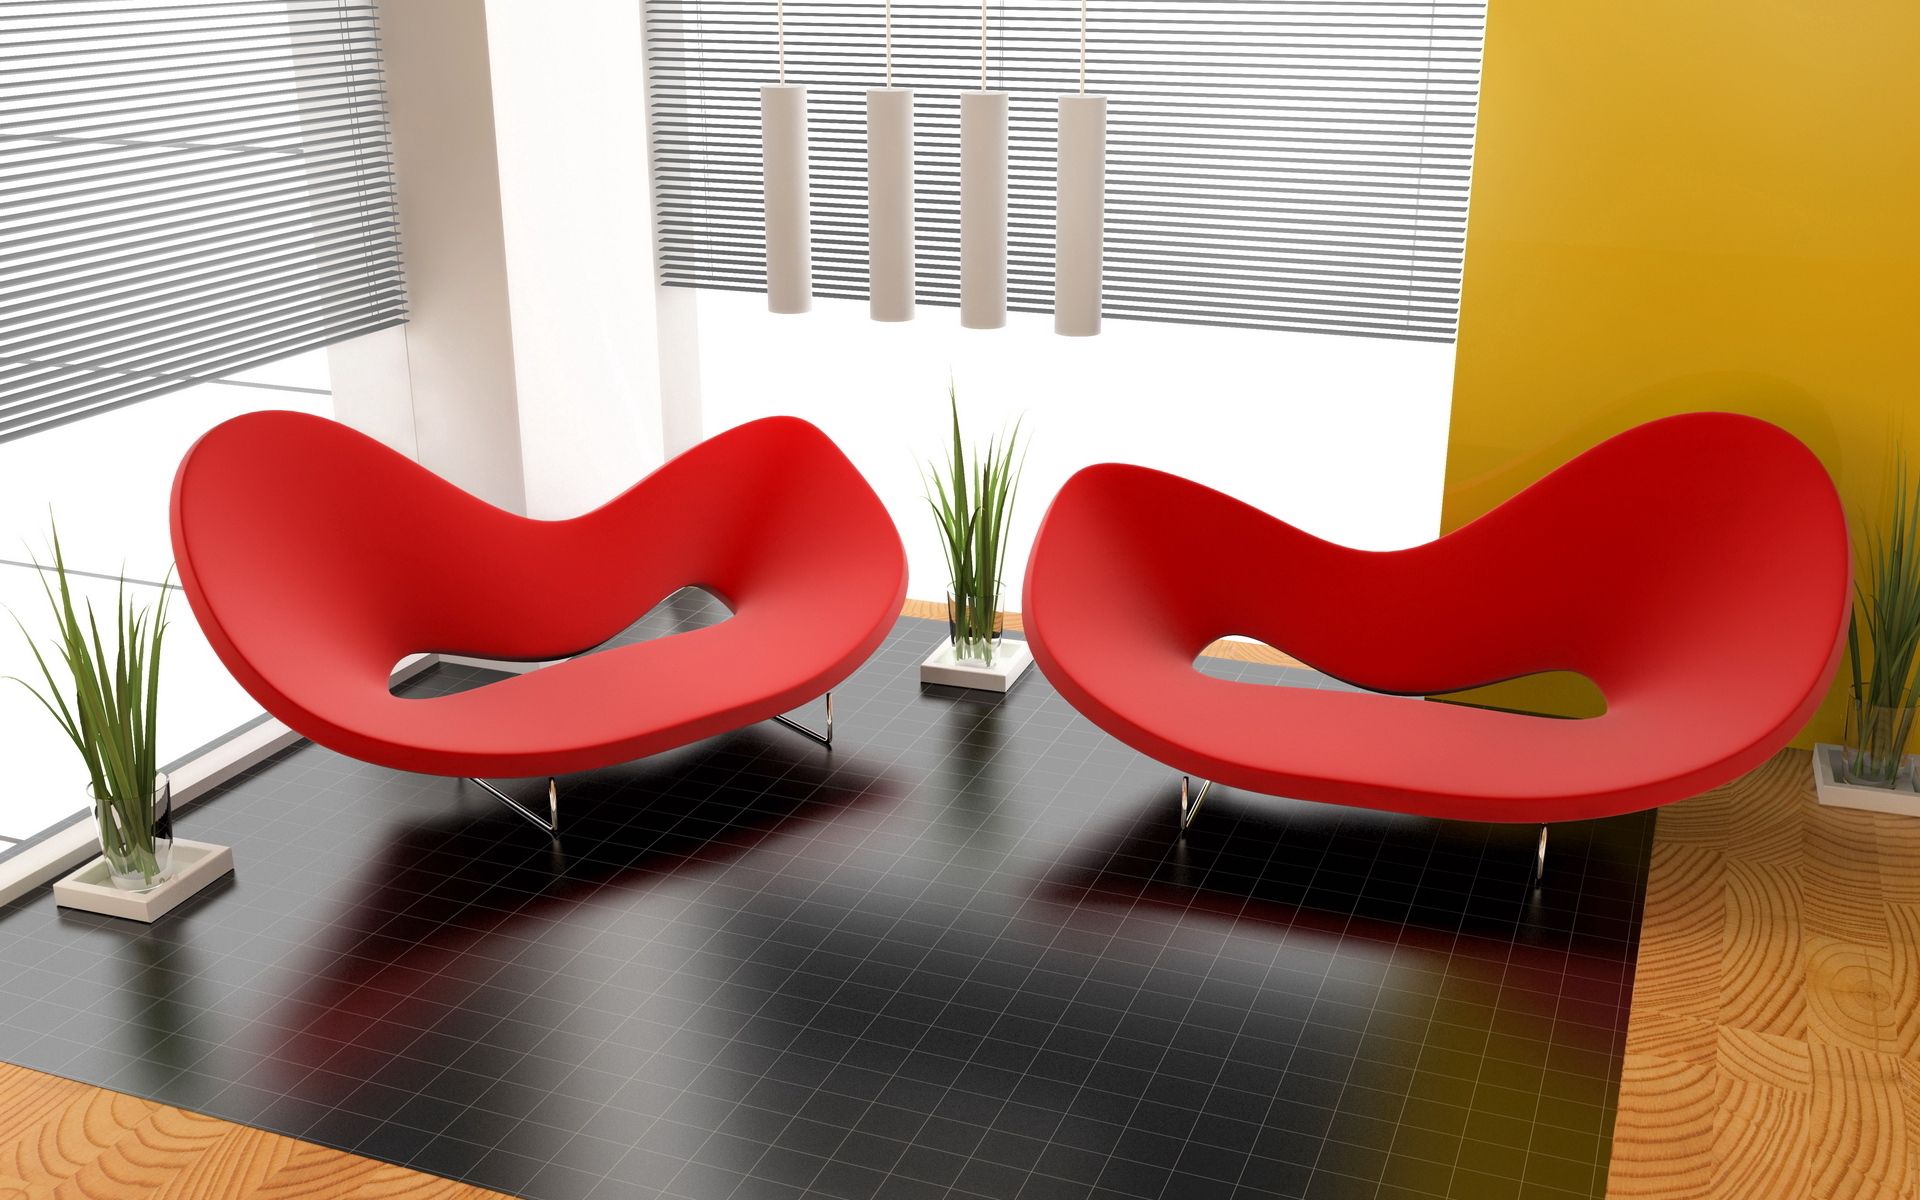 form, flat, plants, interior, red, miscellanea, miscellaneous, design, forms, room, style, armchair, apartment wallpaper for mobile